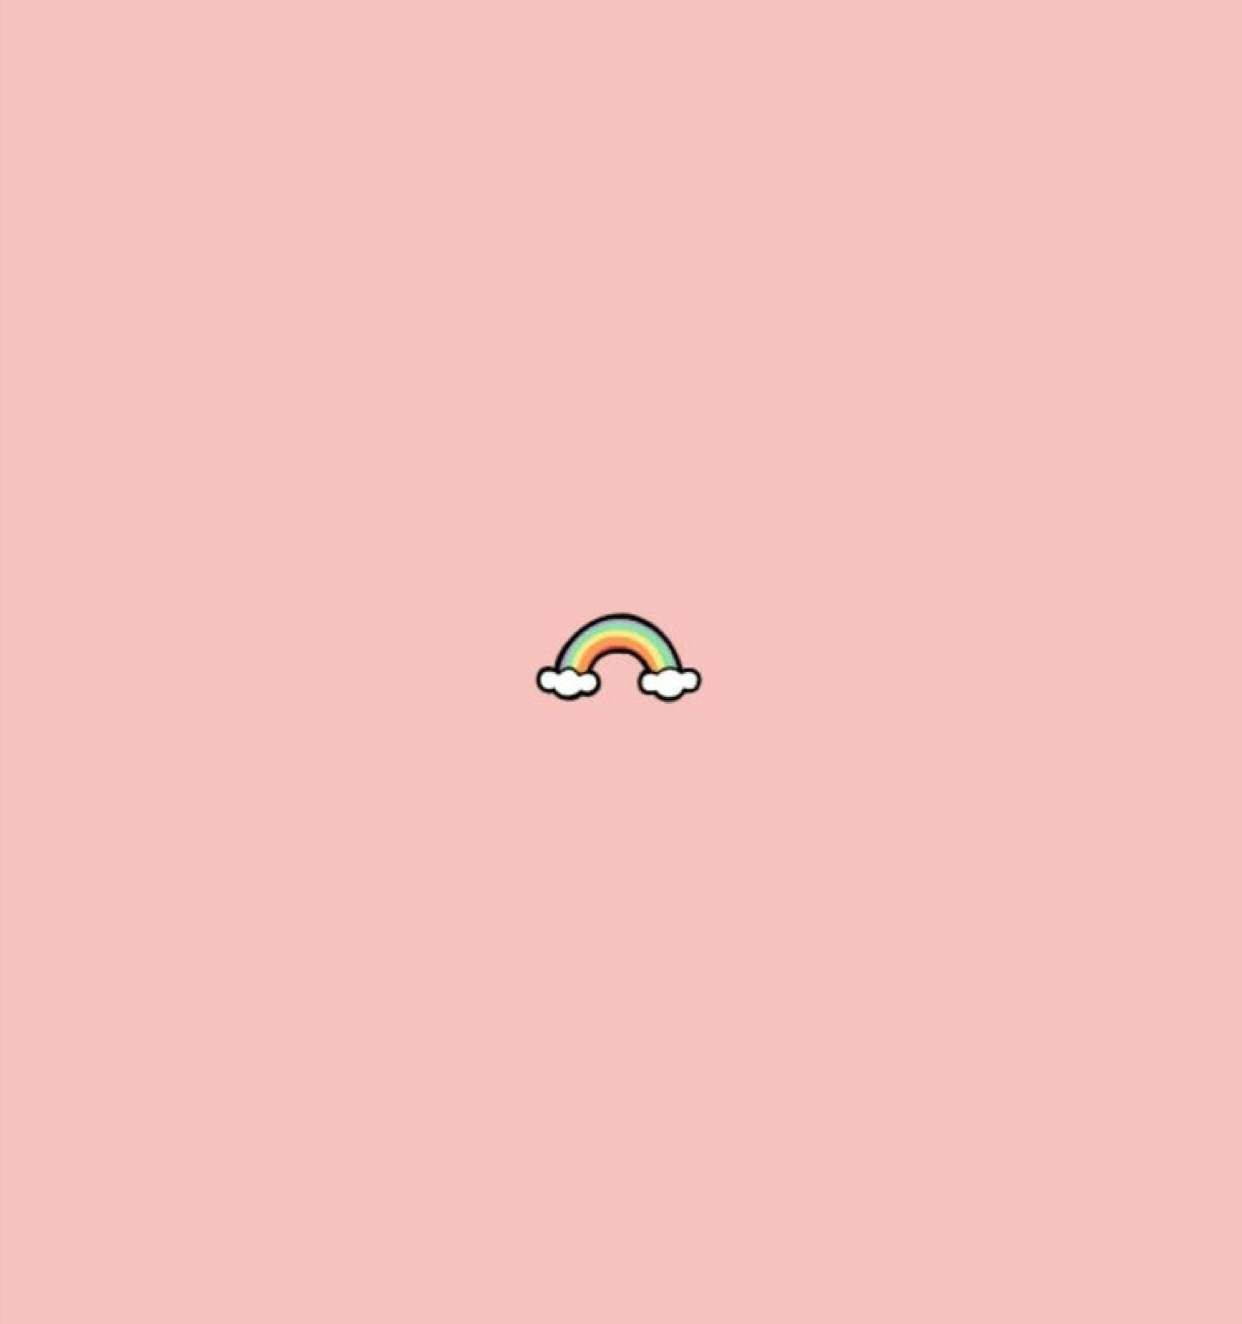 Tiny Rainbow On Cute And Pink Backdrop